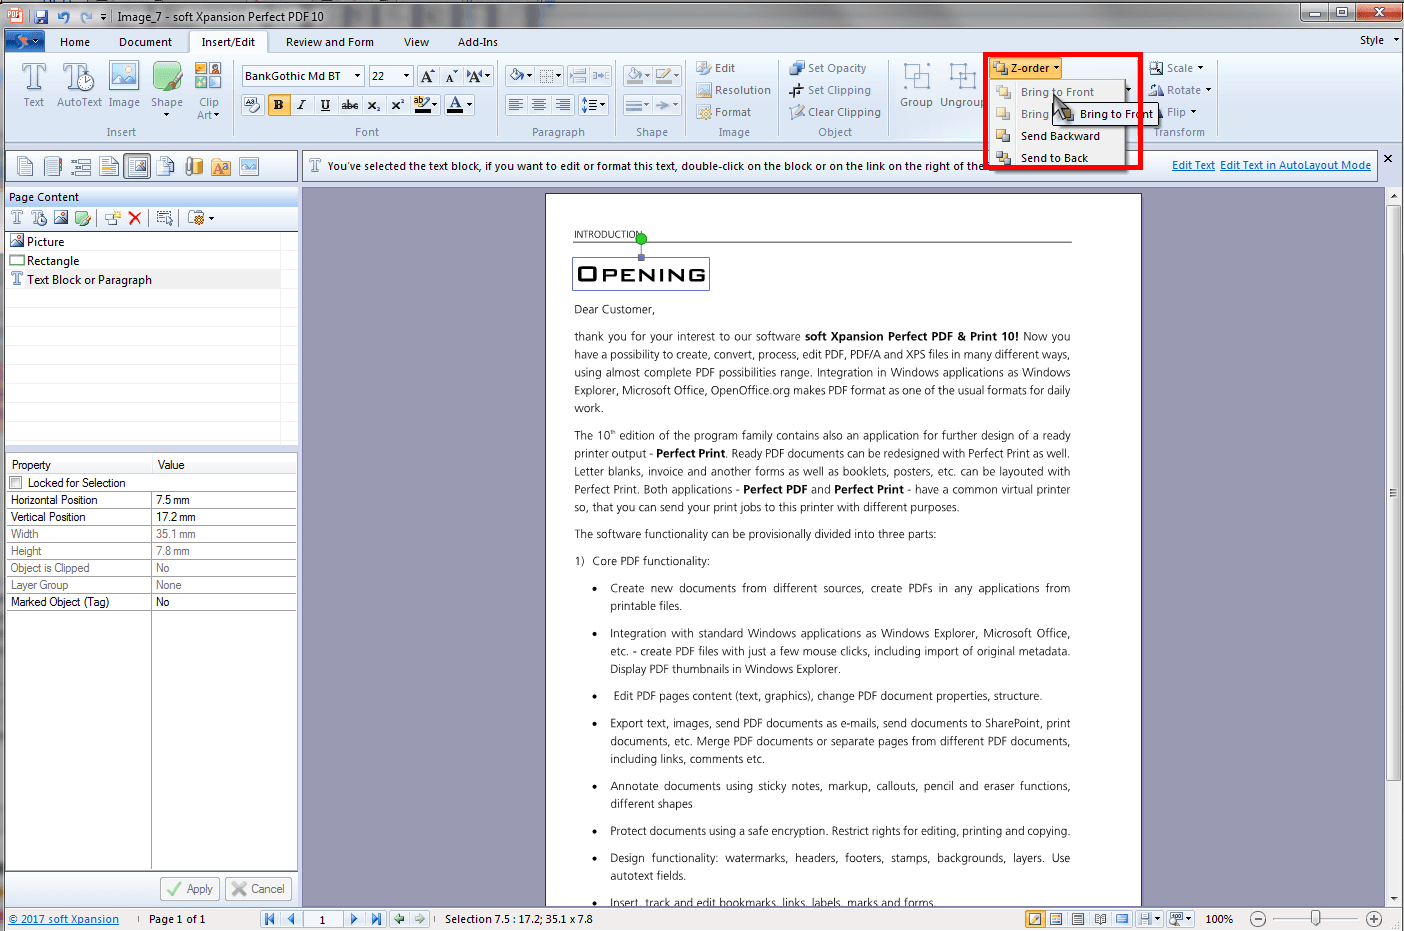 How to edit text in PDF files